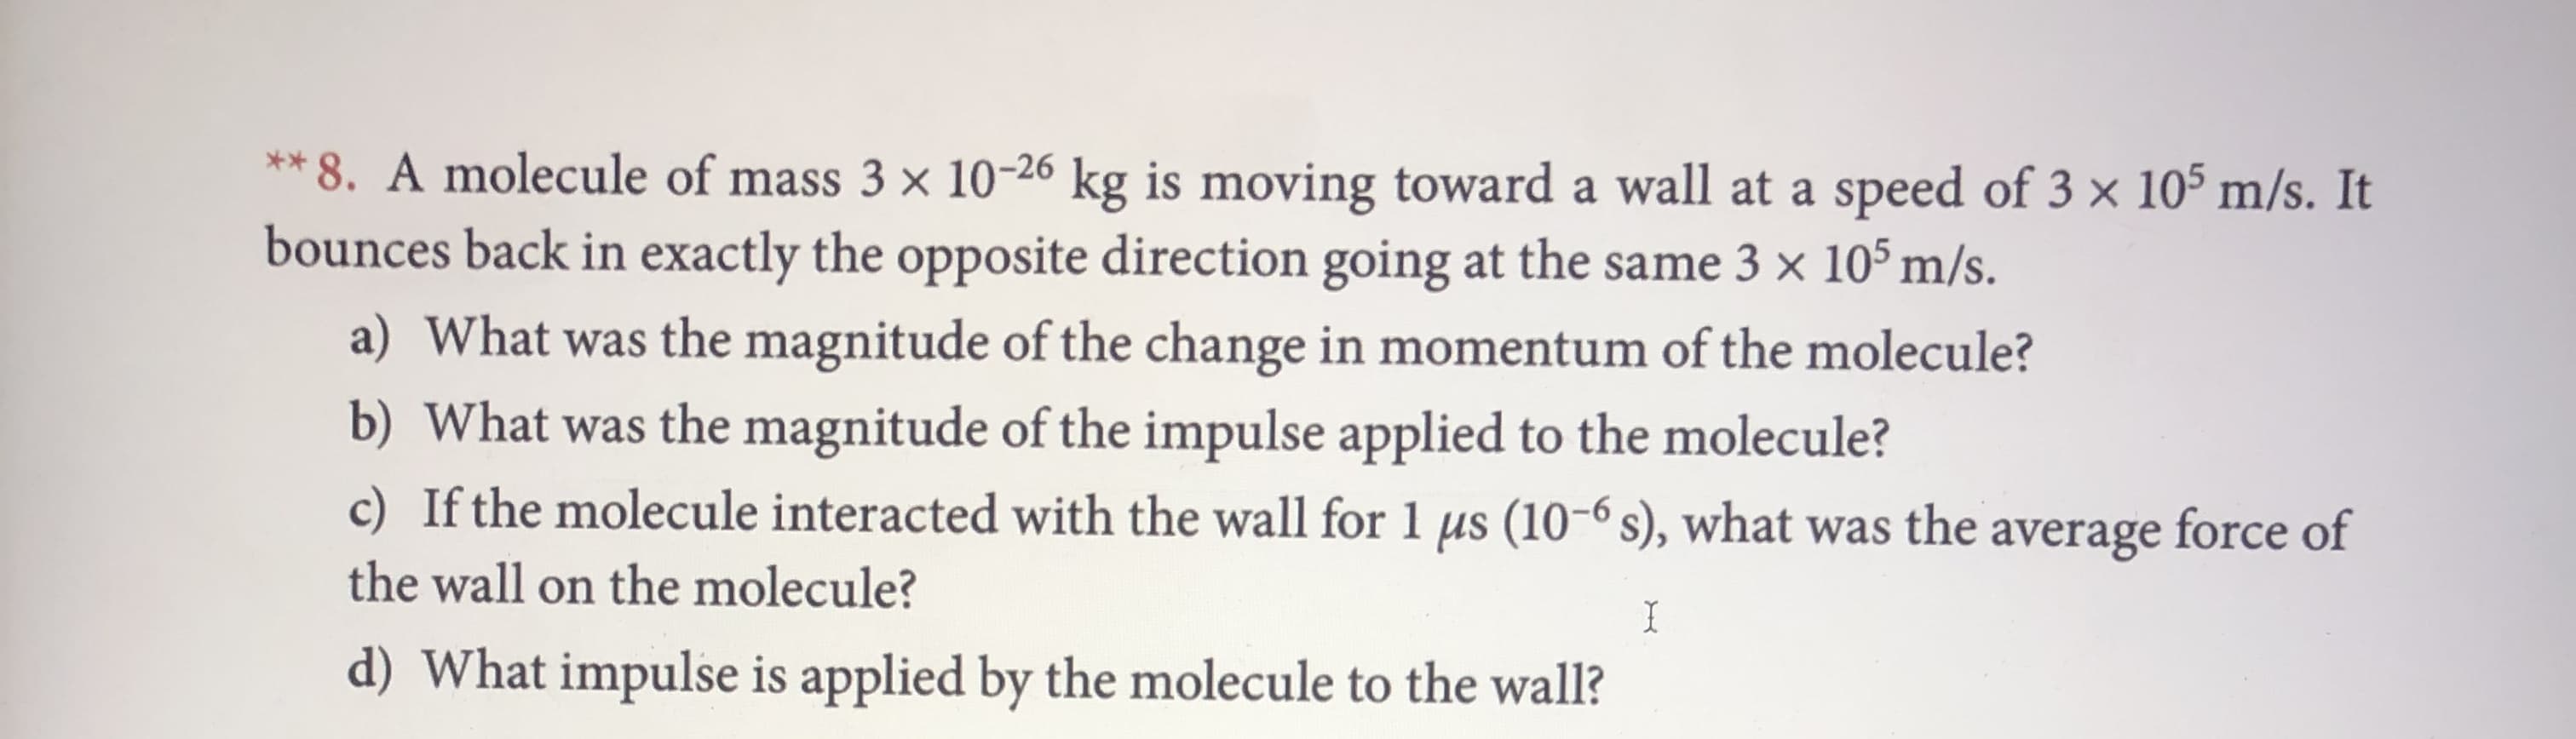 **8. A molecule of mass 3 x 10-26 kg is moving toward a wall at a speed of 3 x 105 m/s. It
bounces back in exactly the opposite direction going at the same 3 x 105 m/s.
a) What was the magnitude of the change in momentum of the mole cule?
b) What was the magnitude of the impulse applied to the molecule?
c) If the molecule interacted with the wall for 1 us (10-6 s), what was the average force of
the wall on the molecule?
I
d) What impulse is applied by the molecule to the wall?
